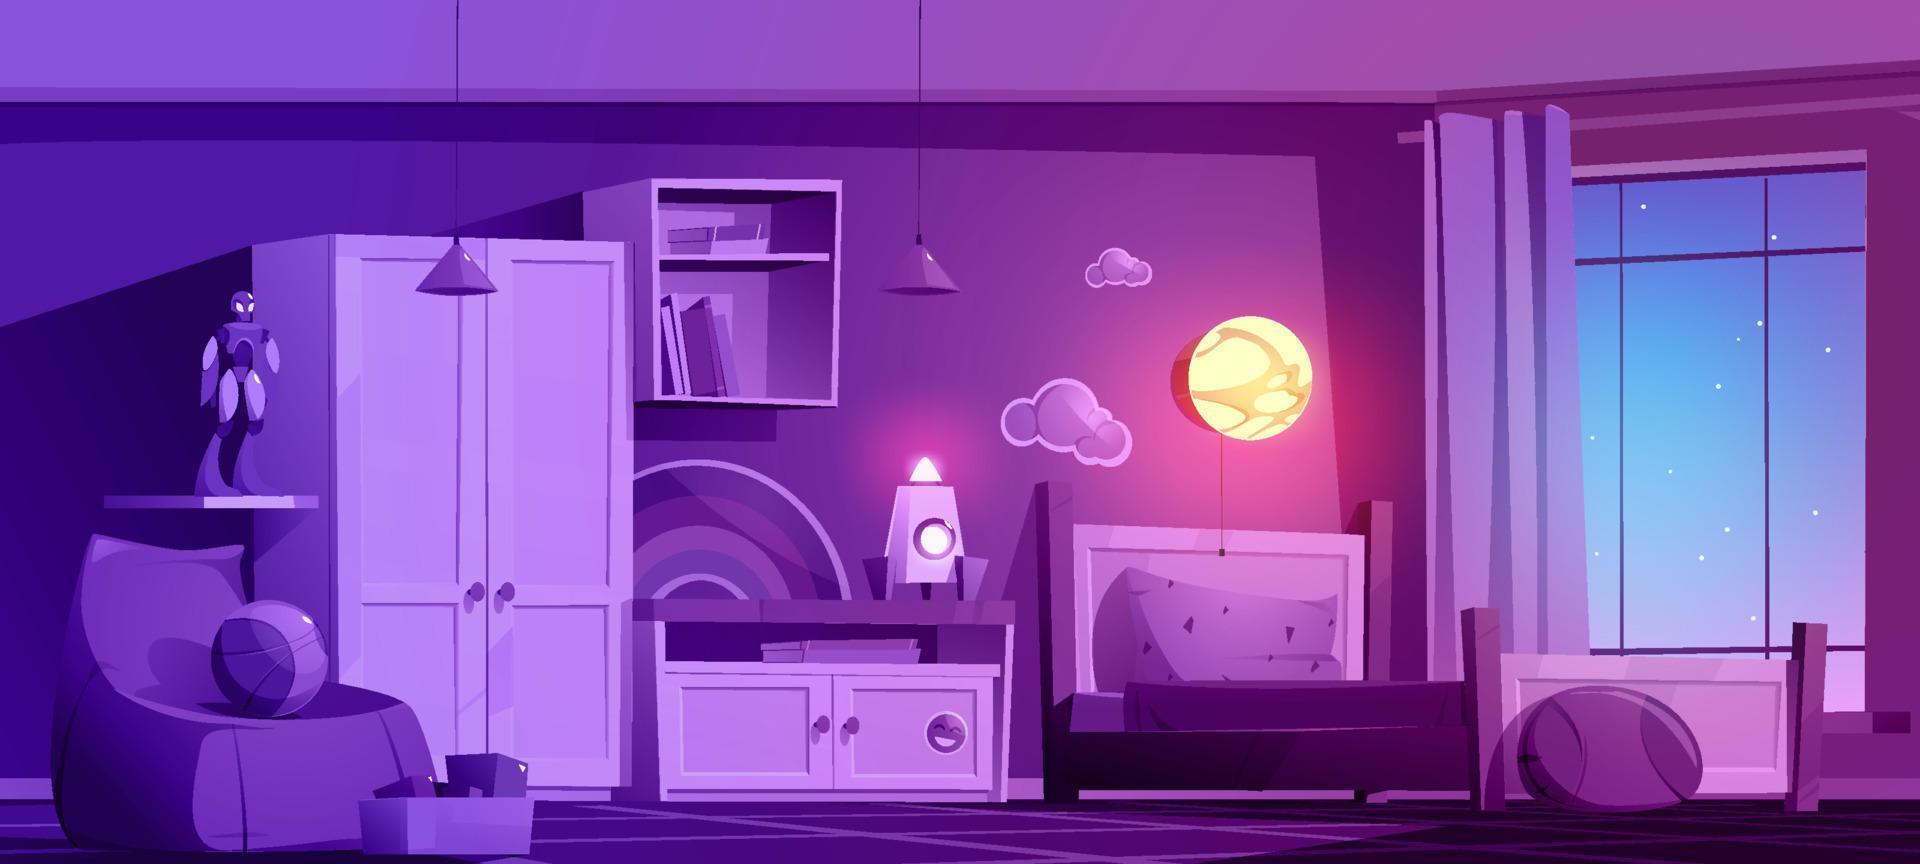 Boys bedroom with bed and toys at night vector